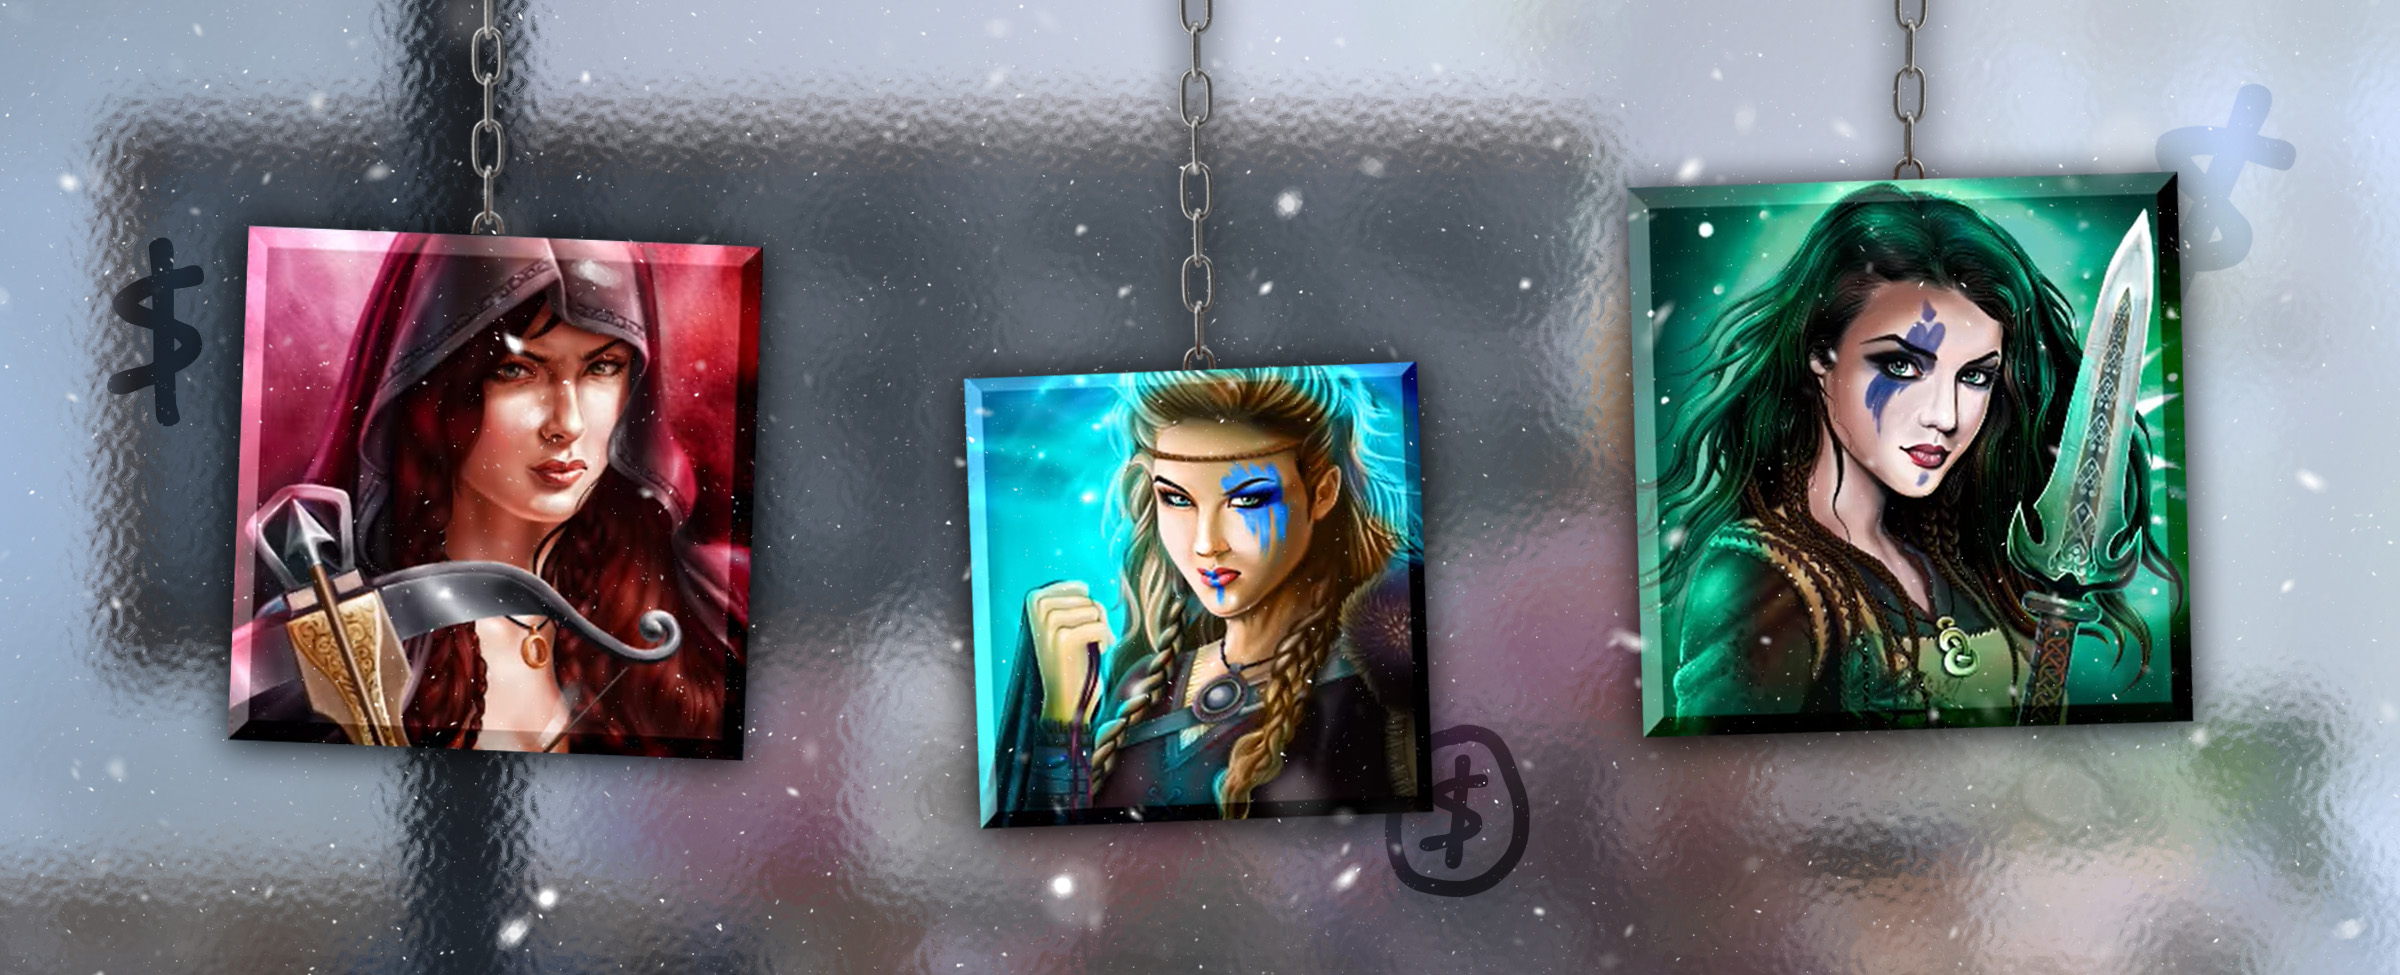 Three illustrated portraits of game characters in the Cafe Casino slot game - Reindeer Wild Wins XL - hang down a glazed shop front window by thin silver chains.